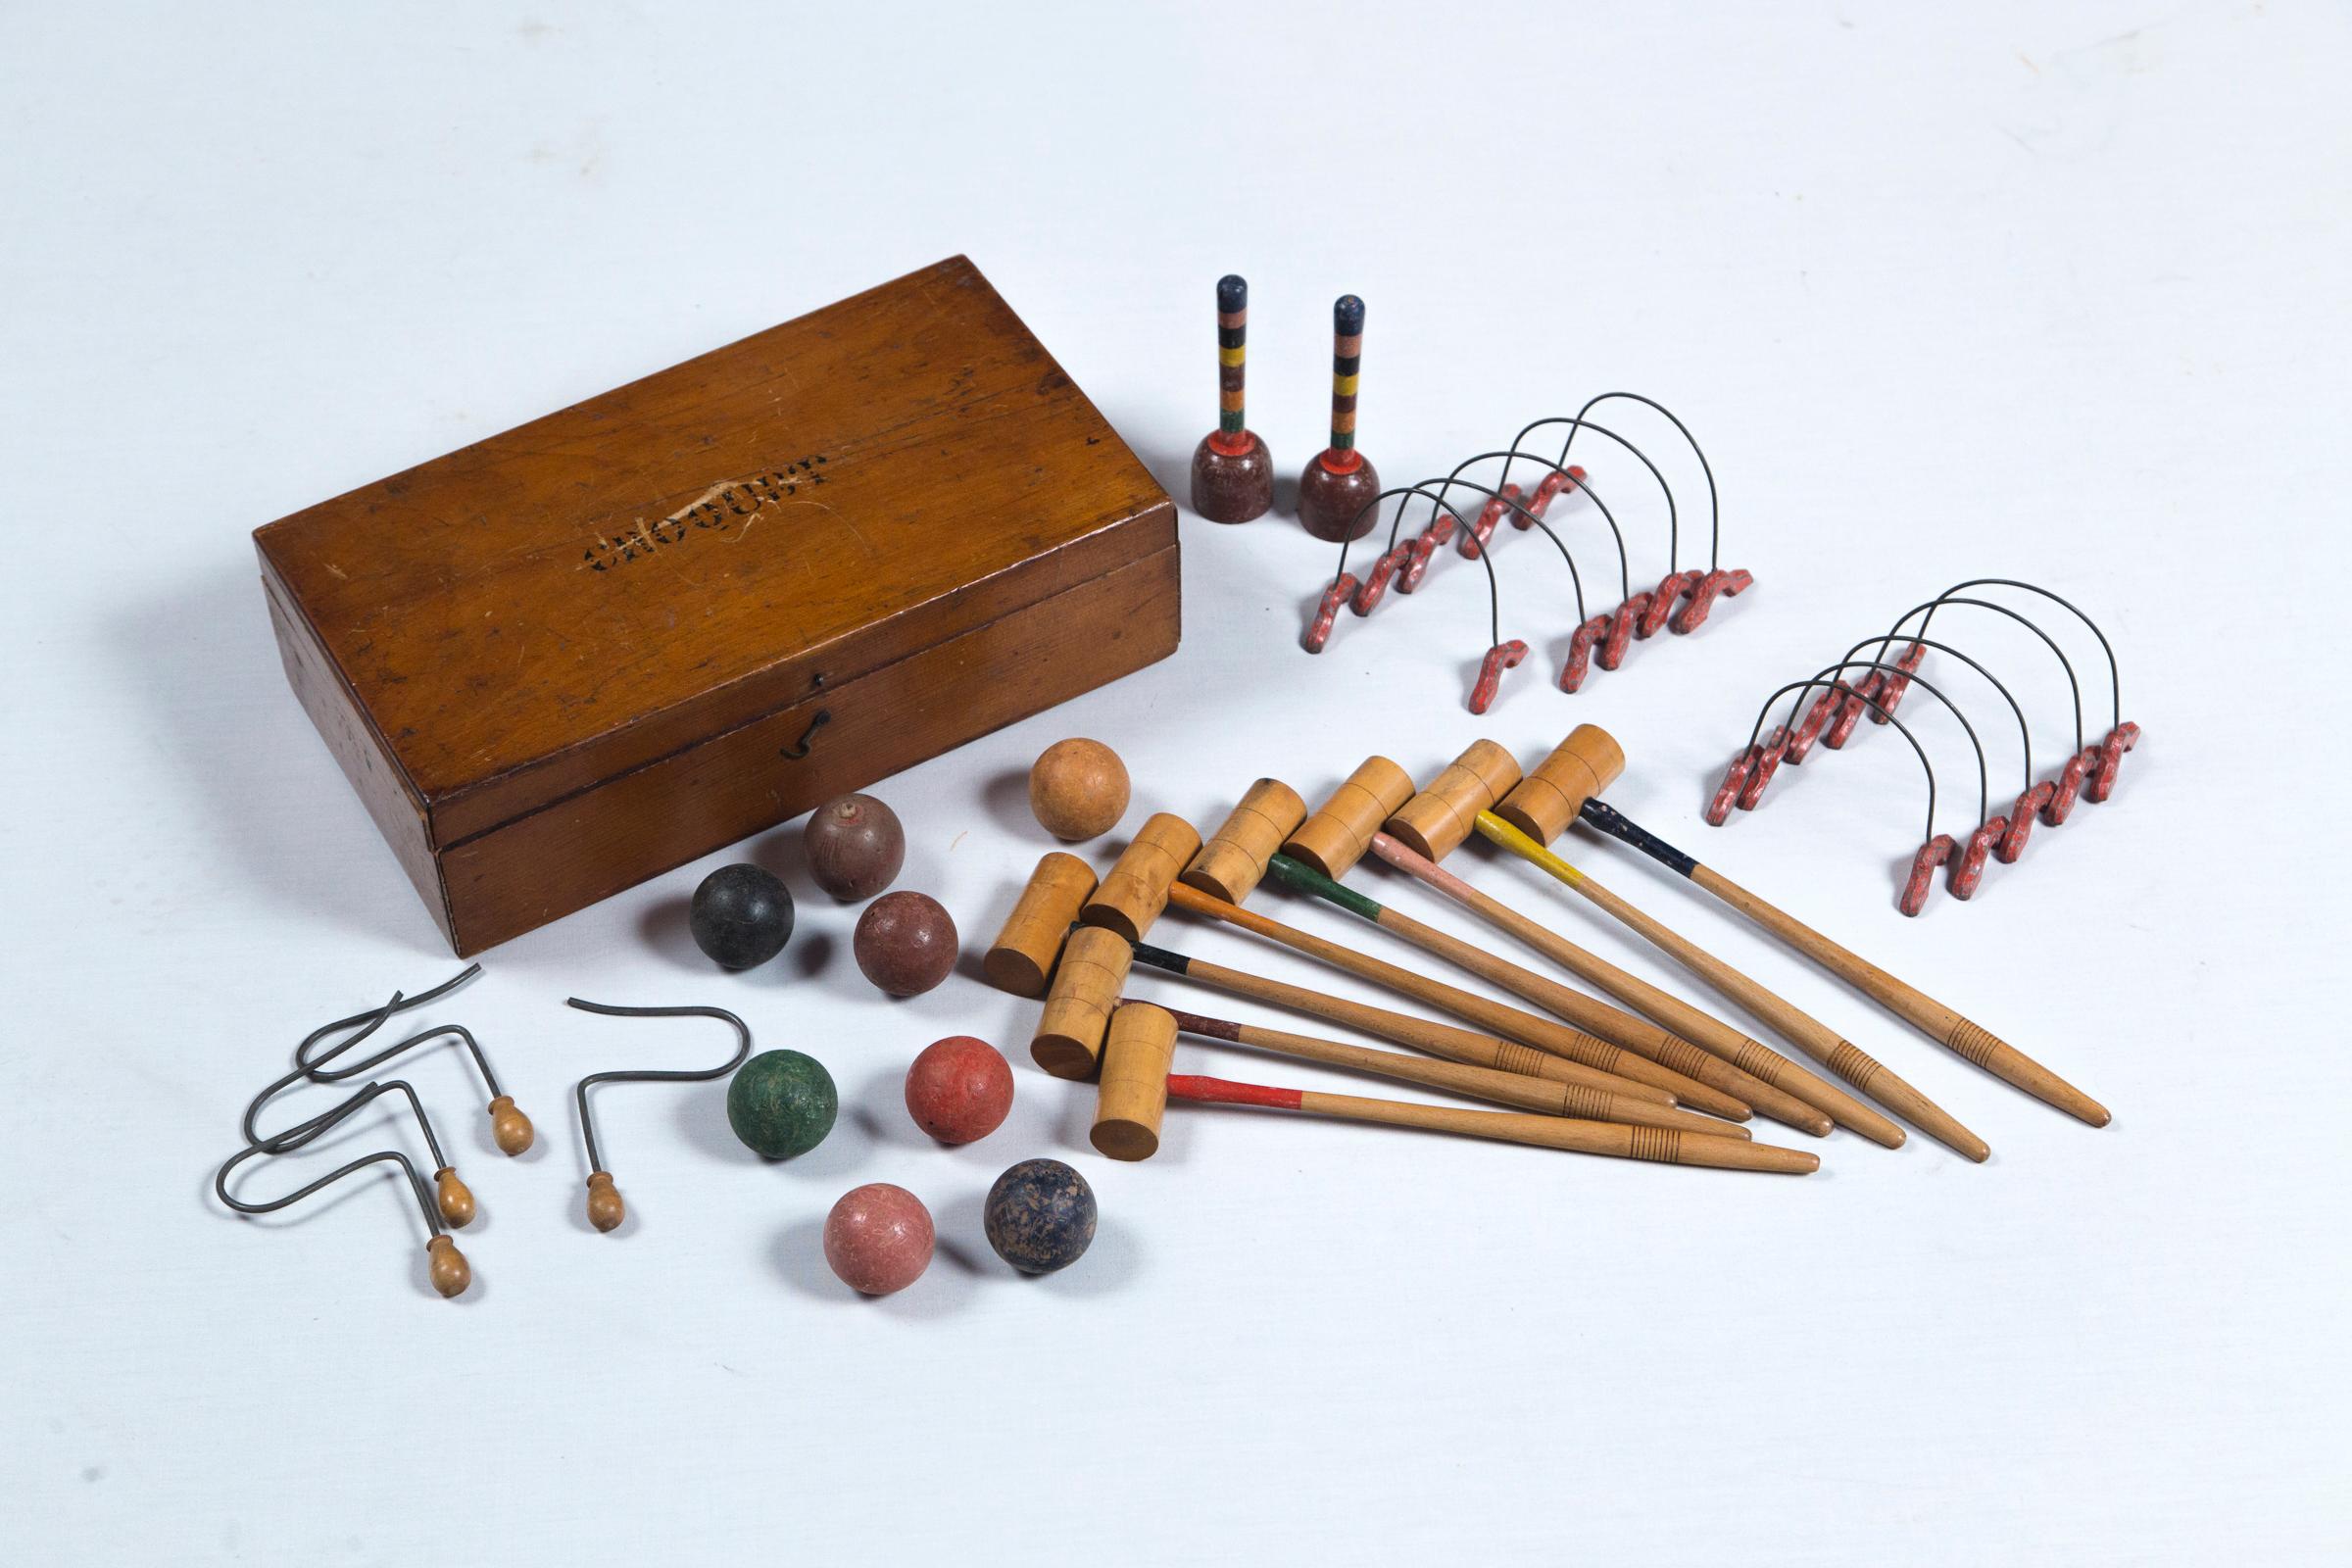 Charming antique mini wood croquet set with hinged wooden box. Eight mallets, eight balls, two stakes, and wickets.